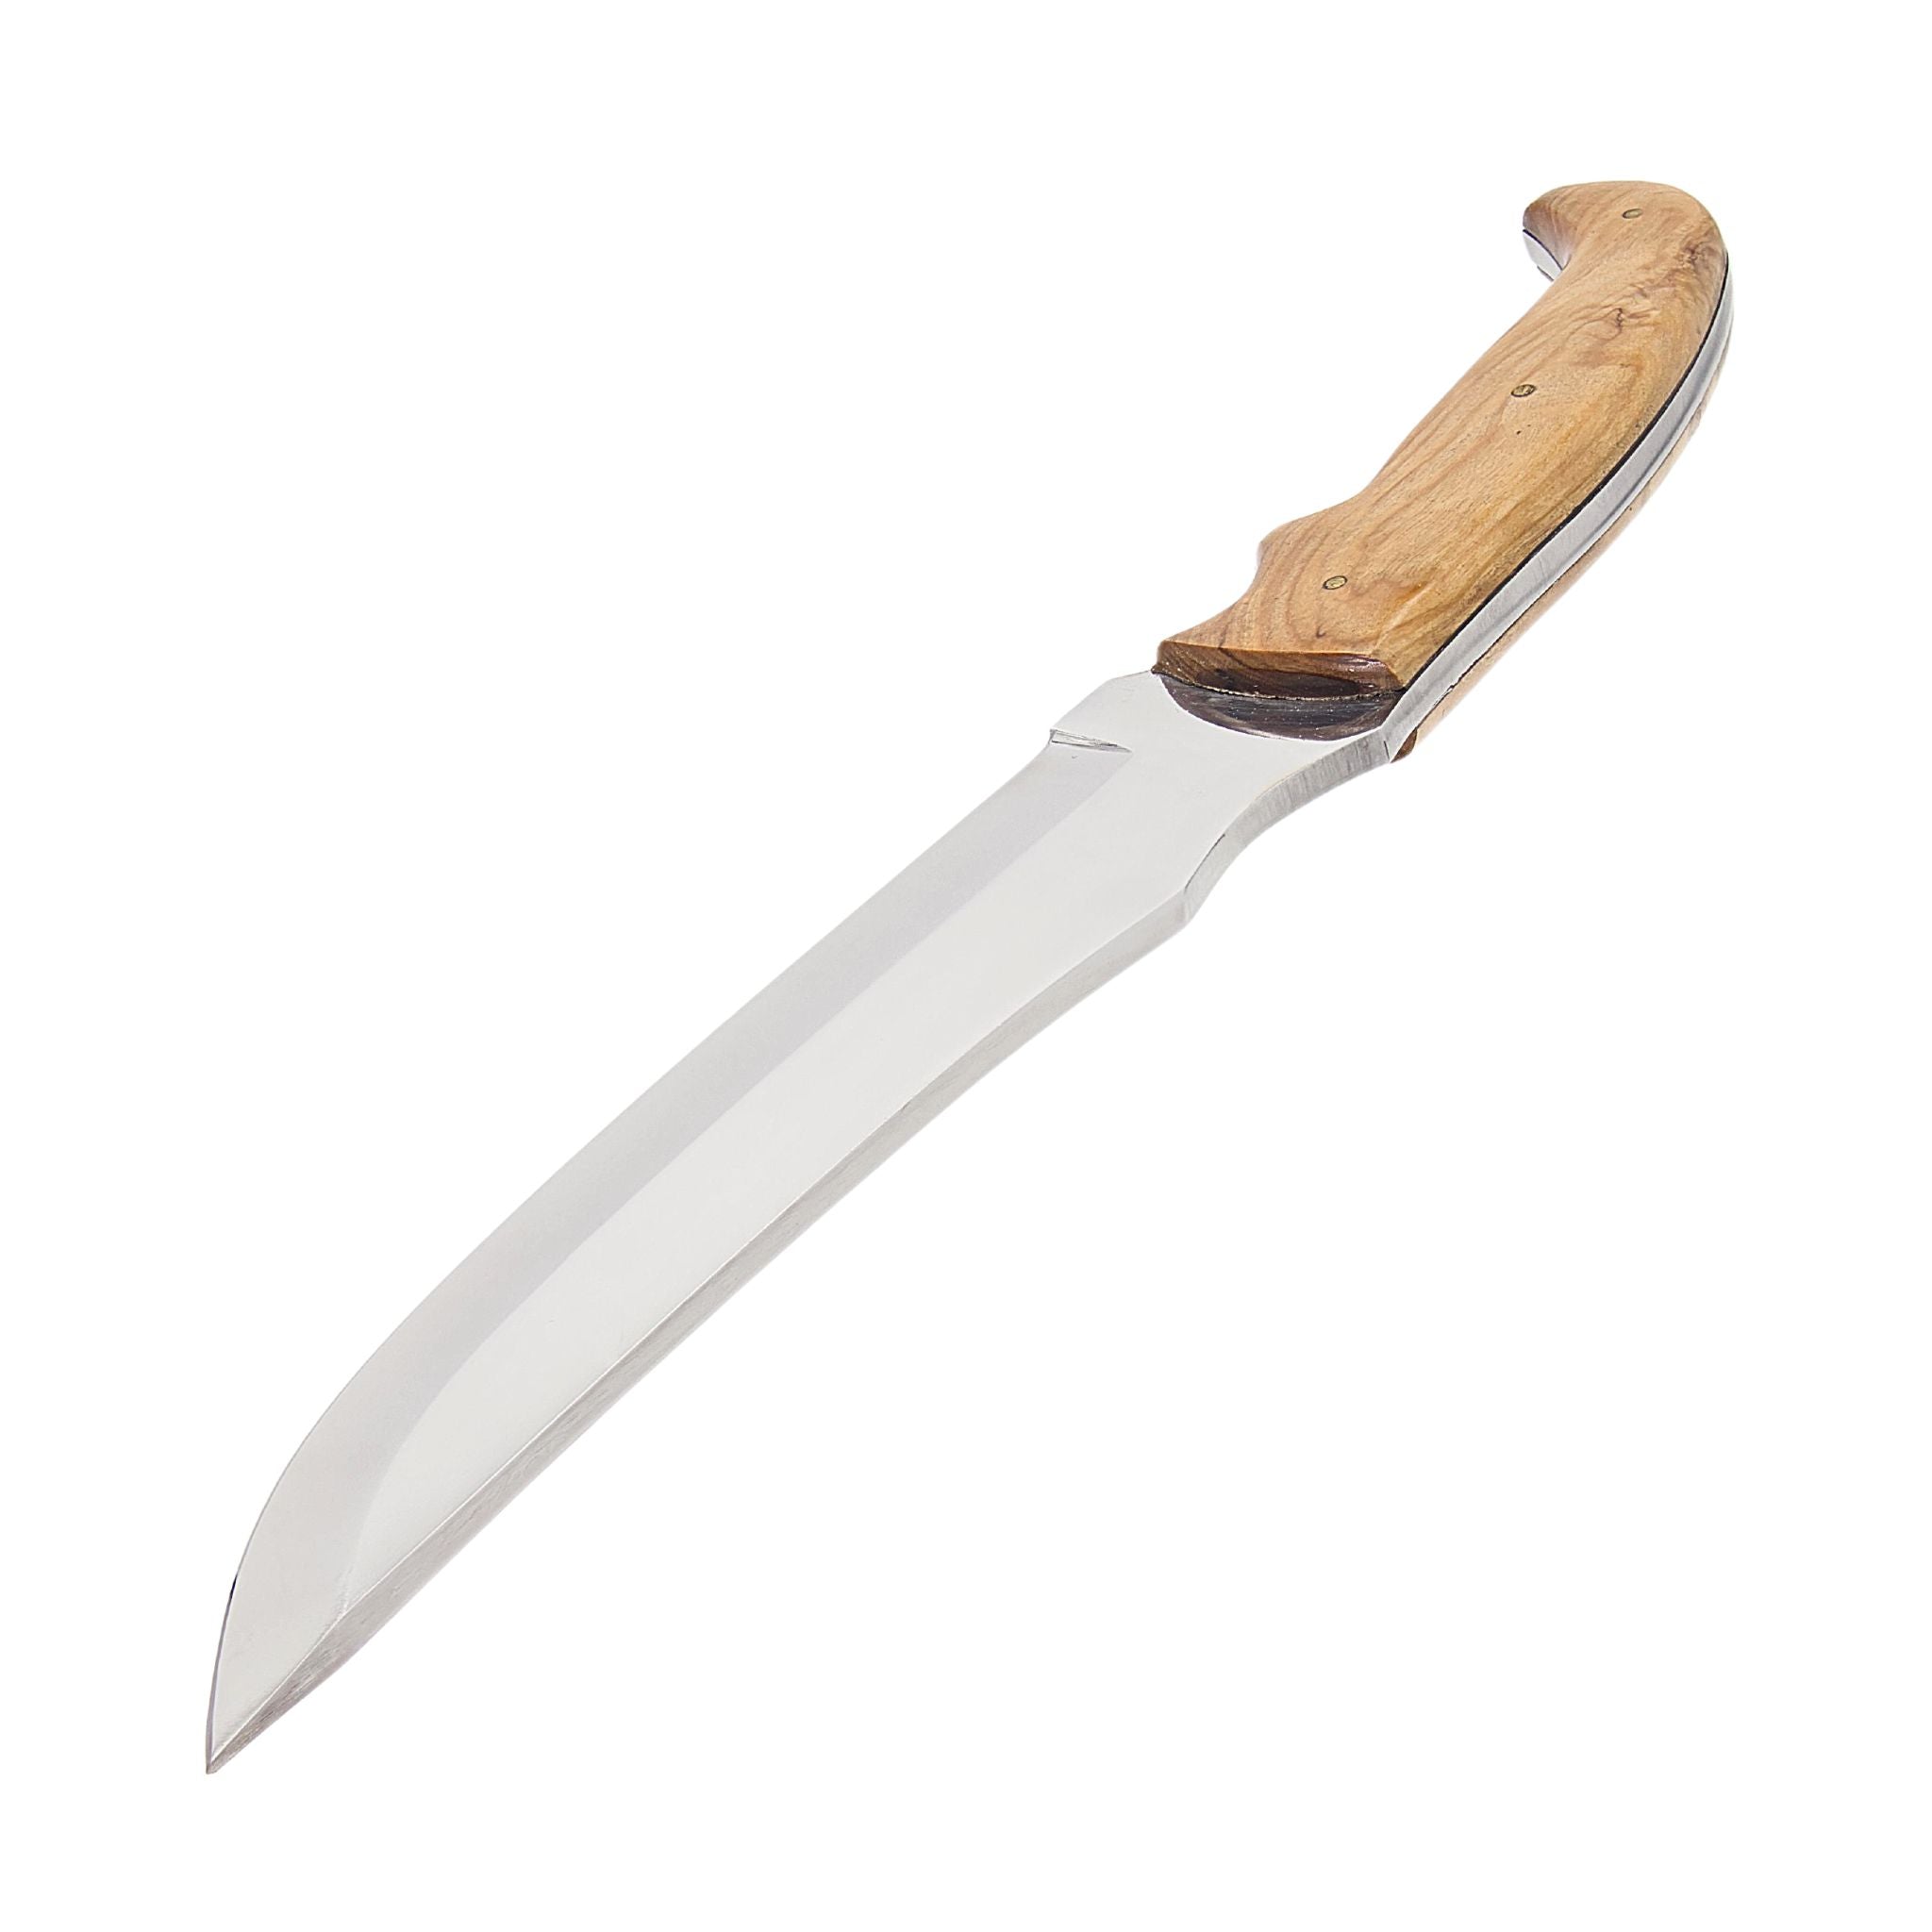 Rapid Action I, Stainless Steel, Handmade Hunting Knife